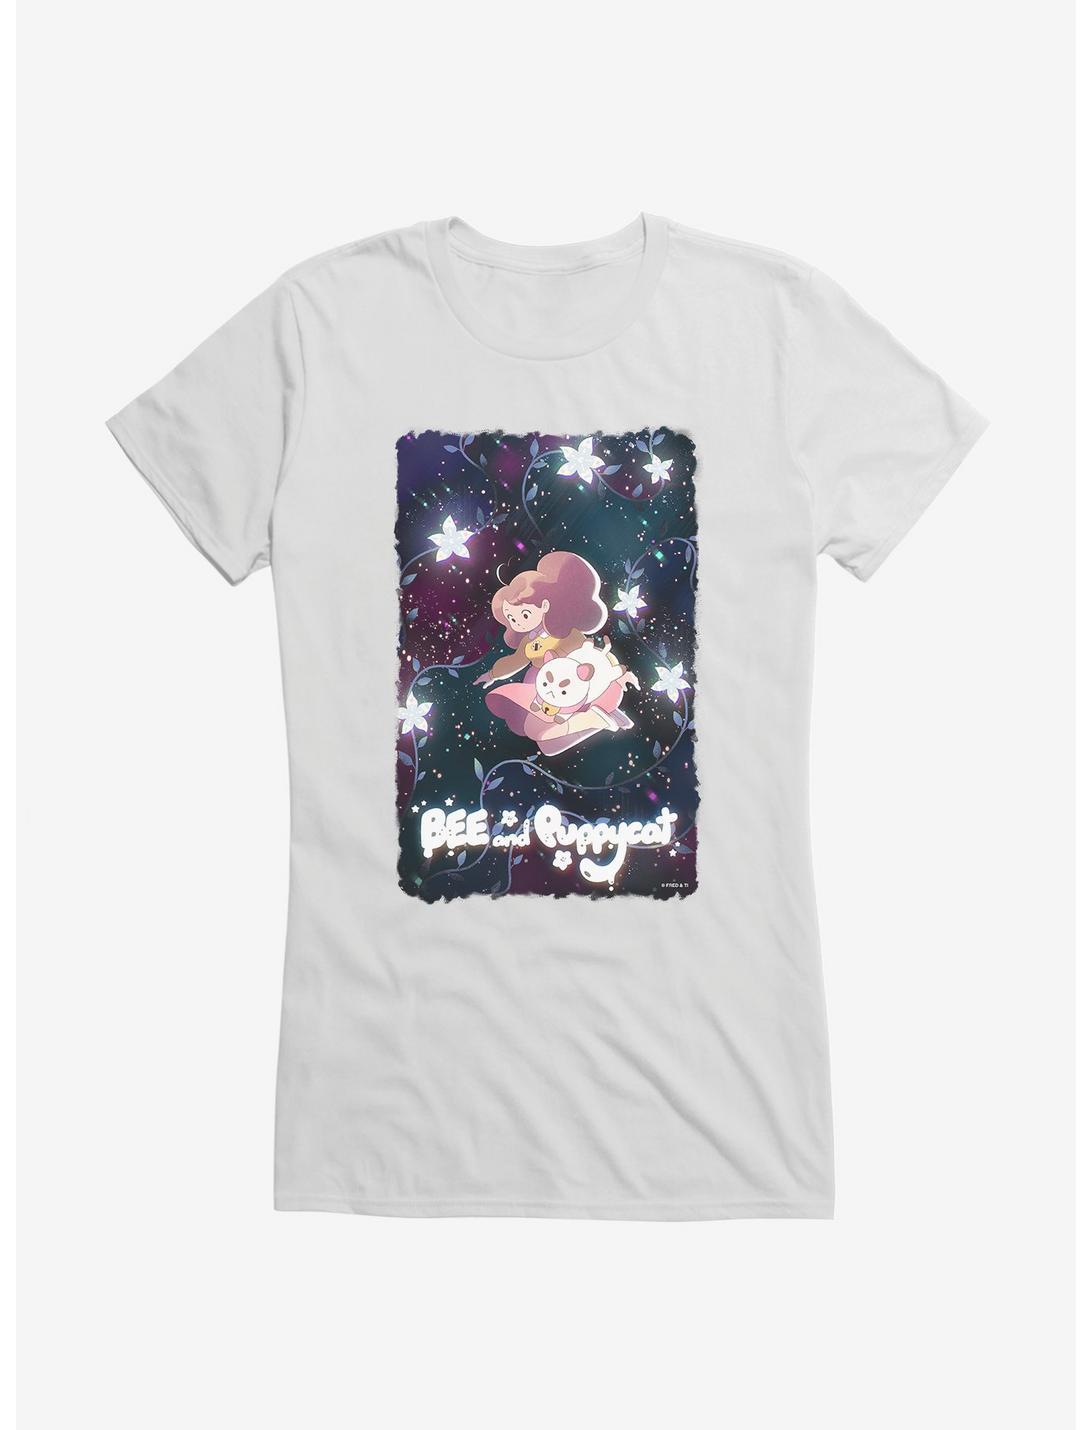 Bee And Puppycat Space Flowers Poster Girls T-Shirt, WHITE, hi-res